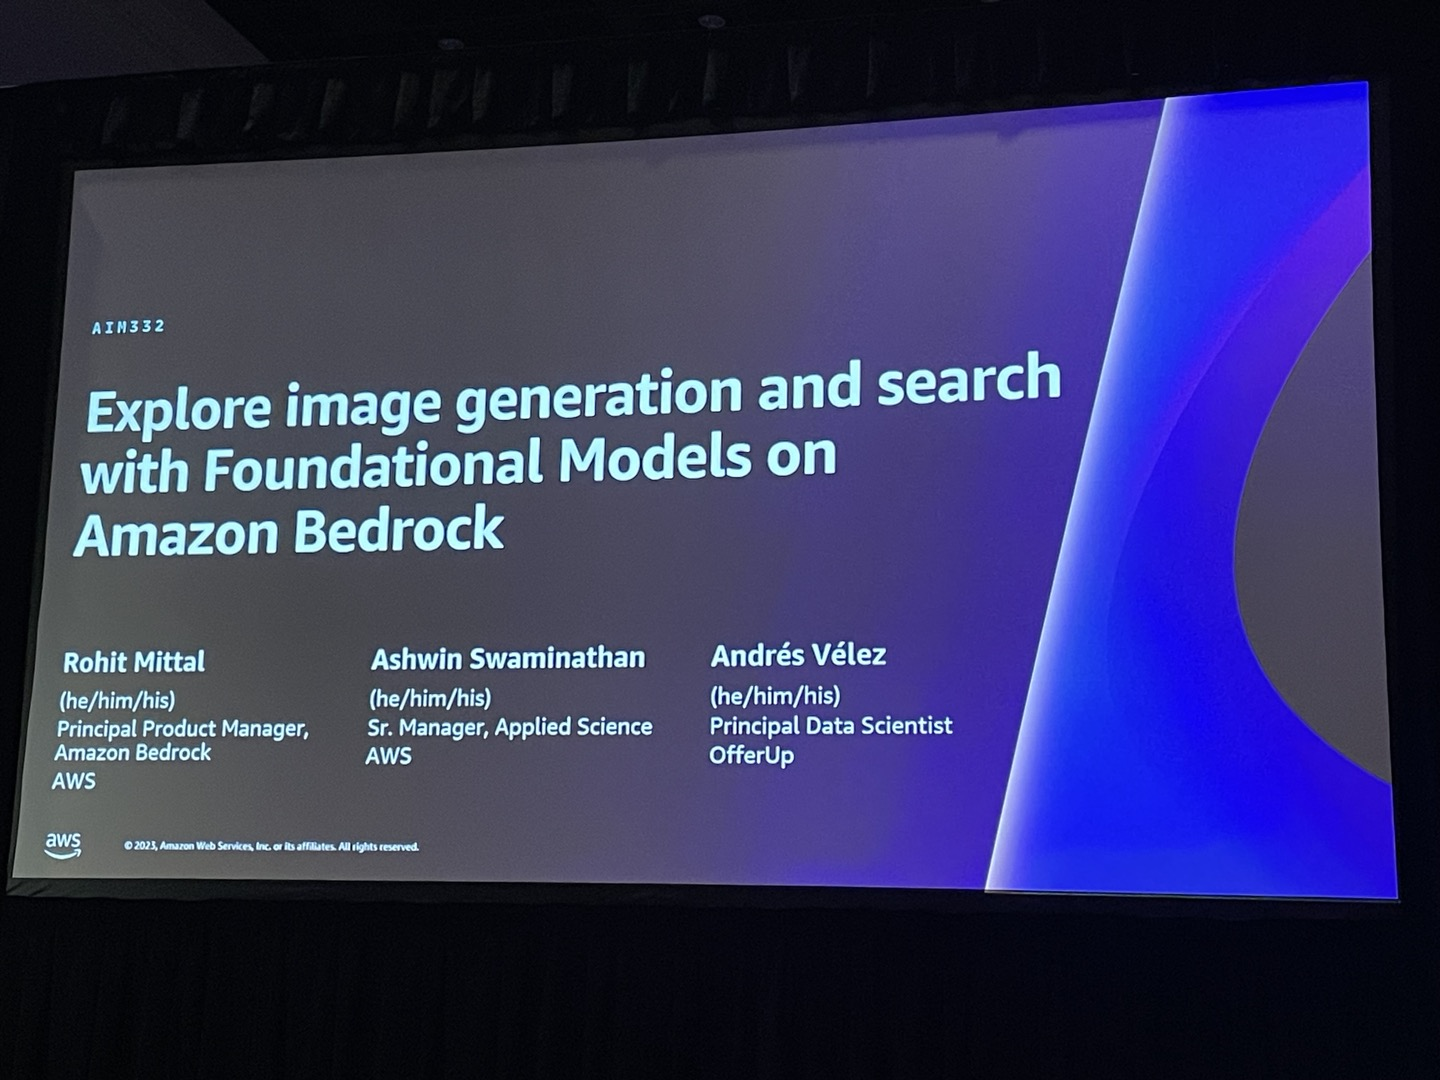 Explore image generation and search with FMs on Amazon Bedrock